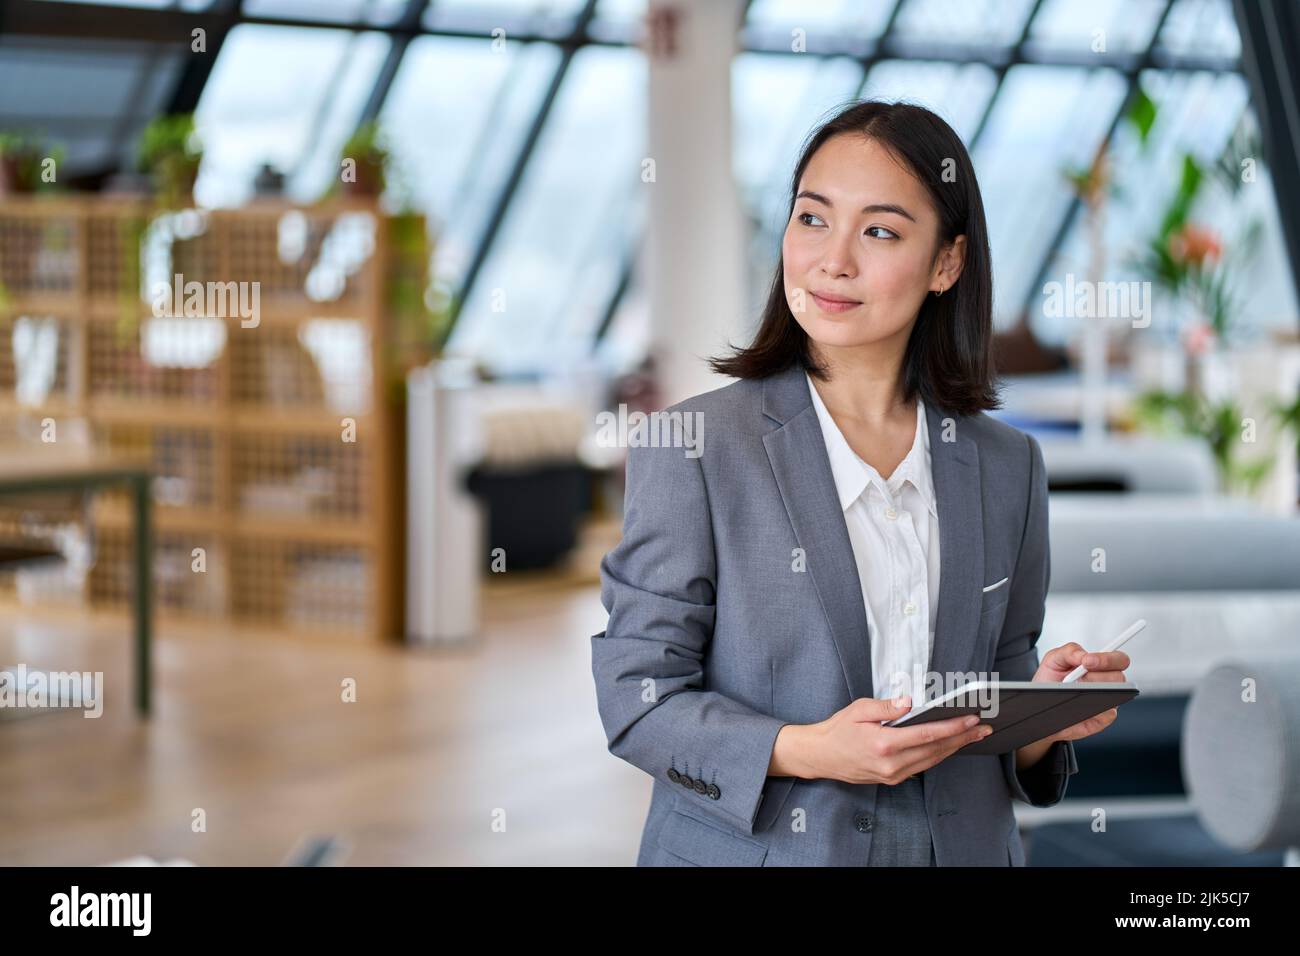 Young Asian business woman standing in office holding digital tablet. Stock Photo